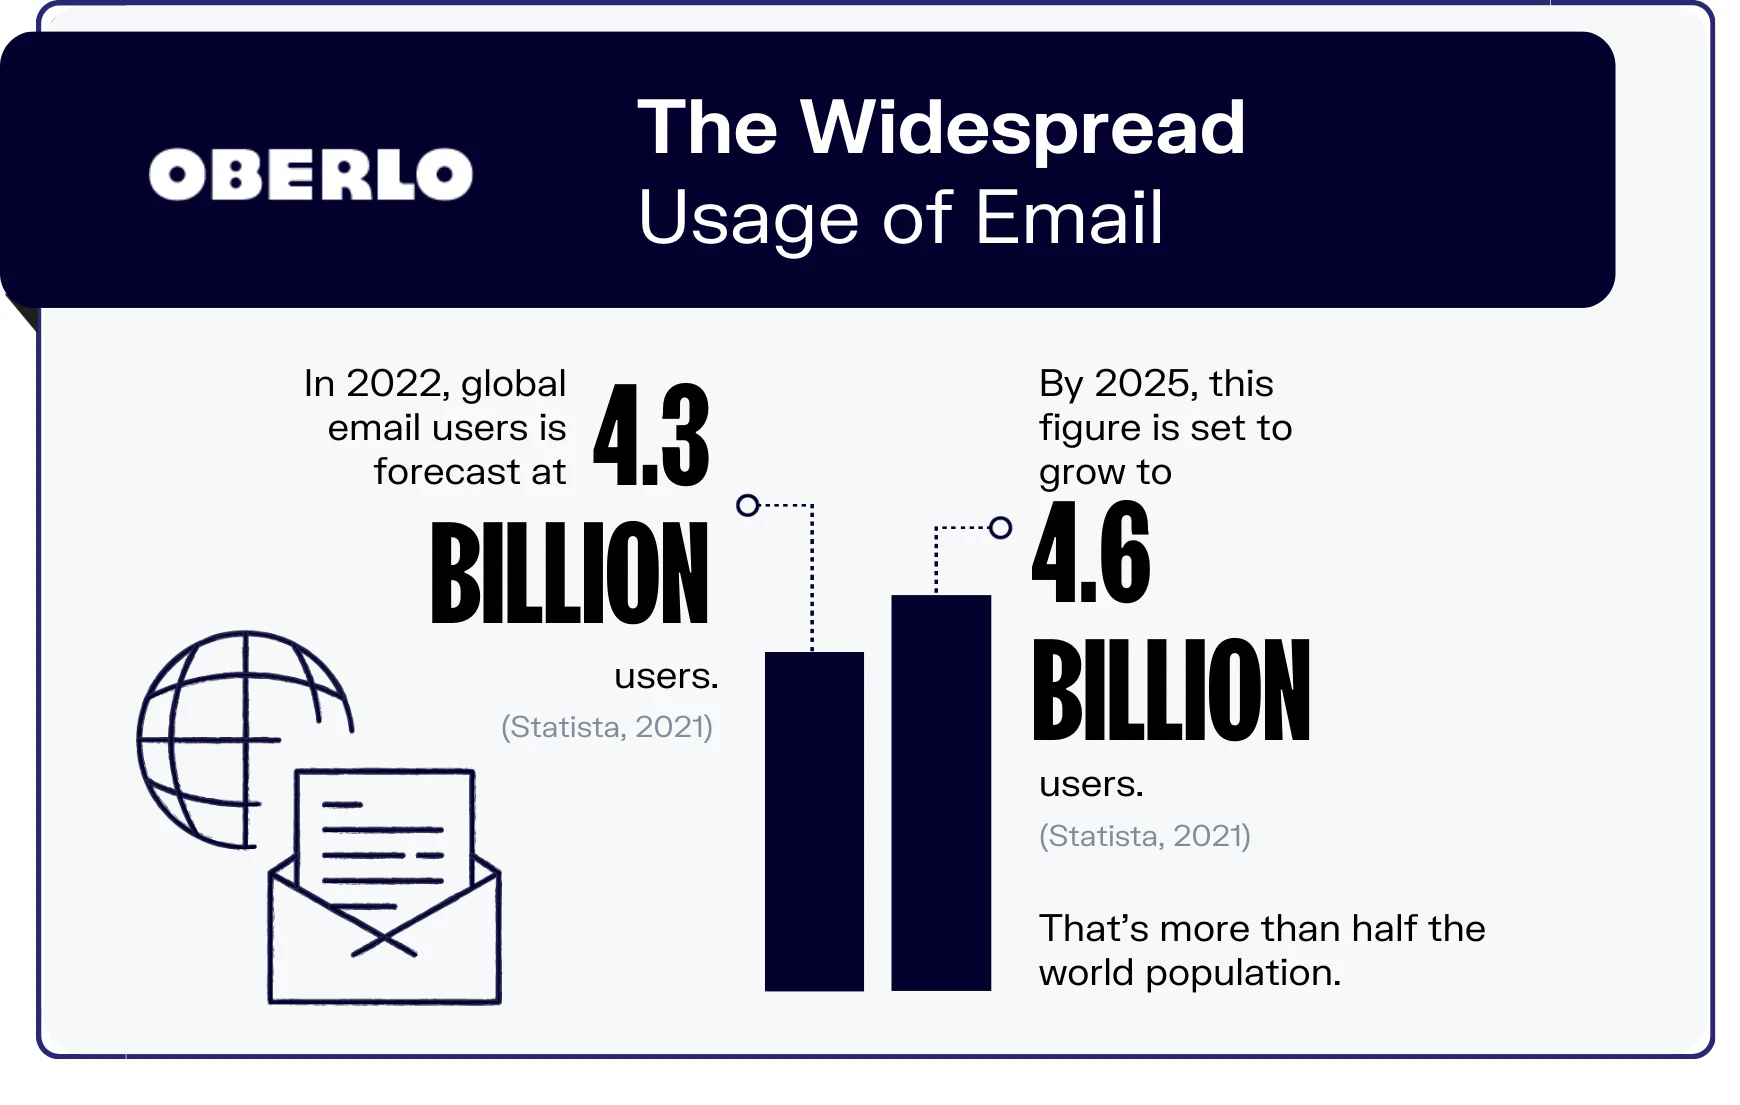 Forecast of global email users to keep in mind when following the blog promotion checklist